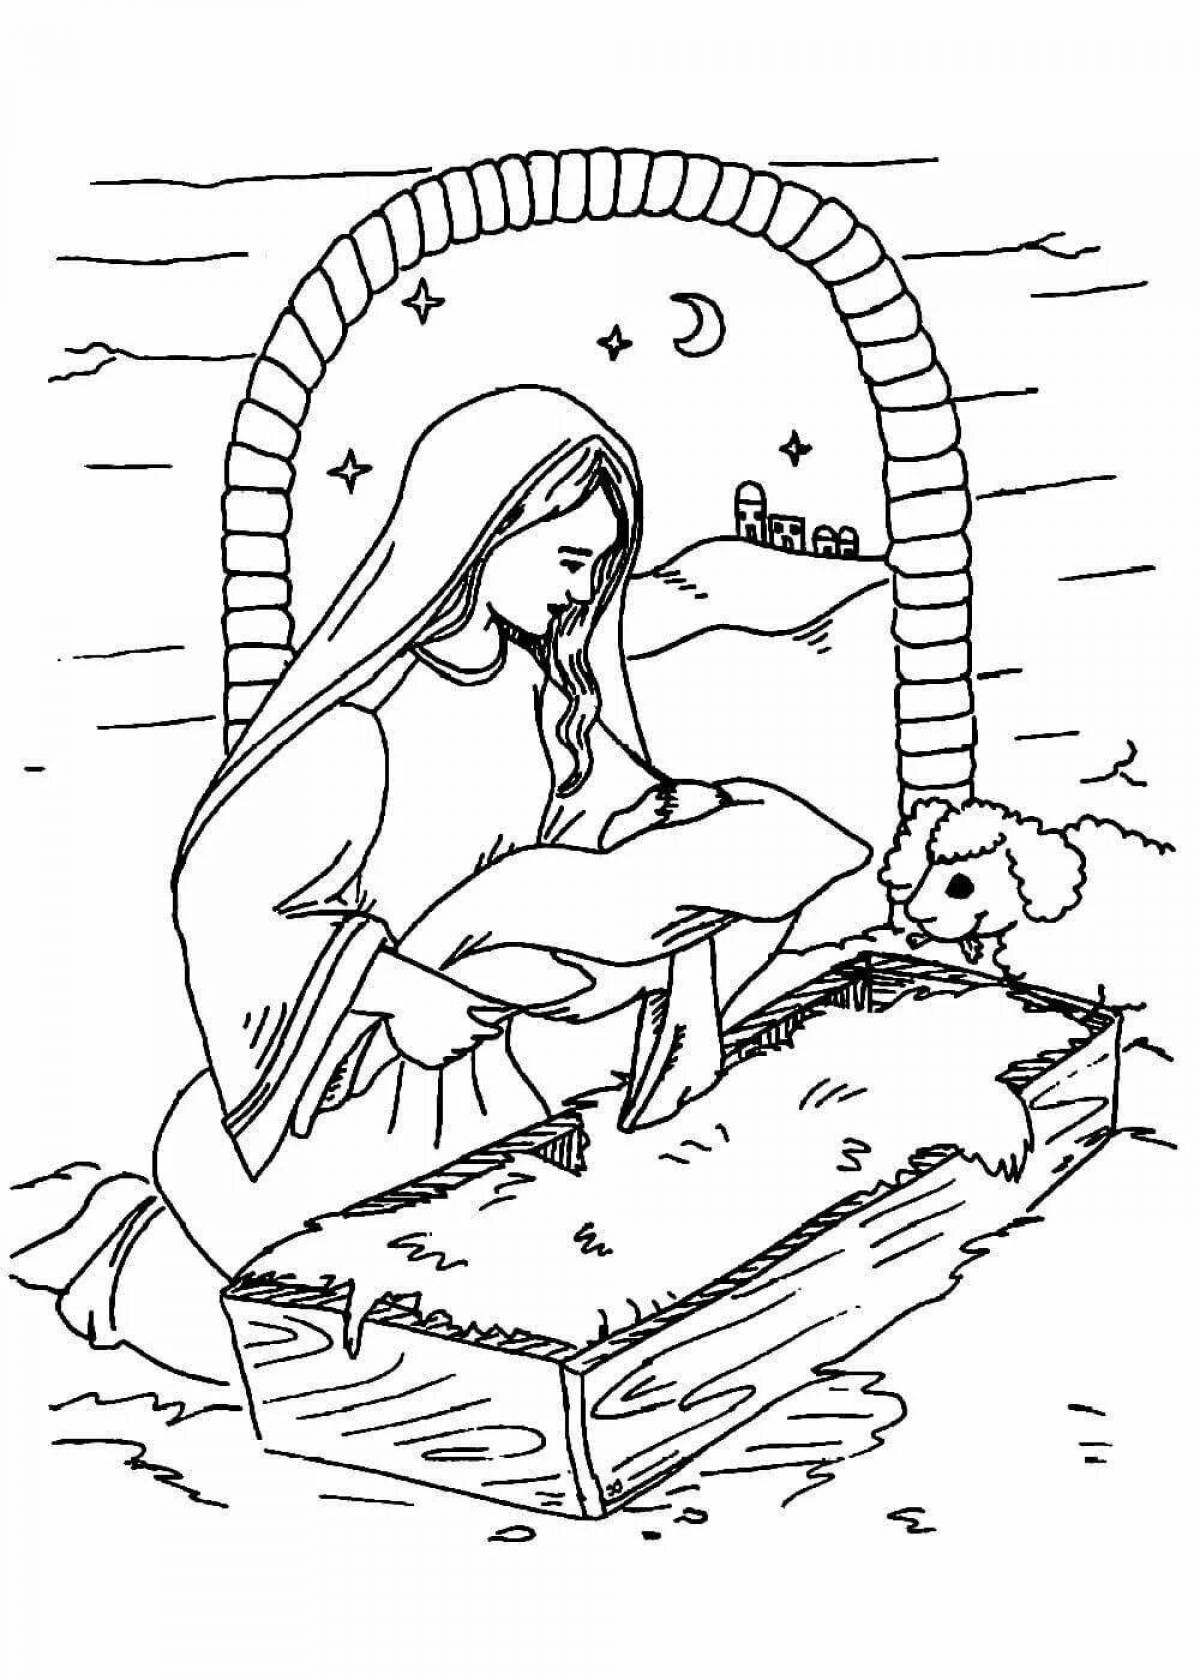 Coloring illustration of the birth of jesus christ